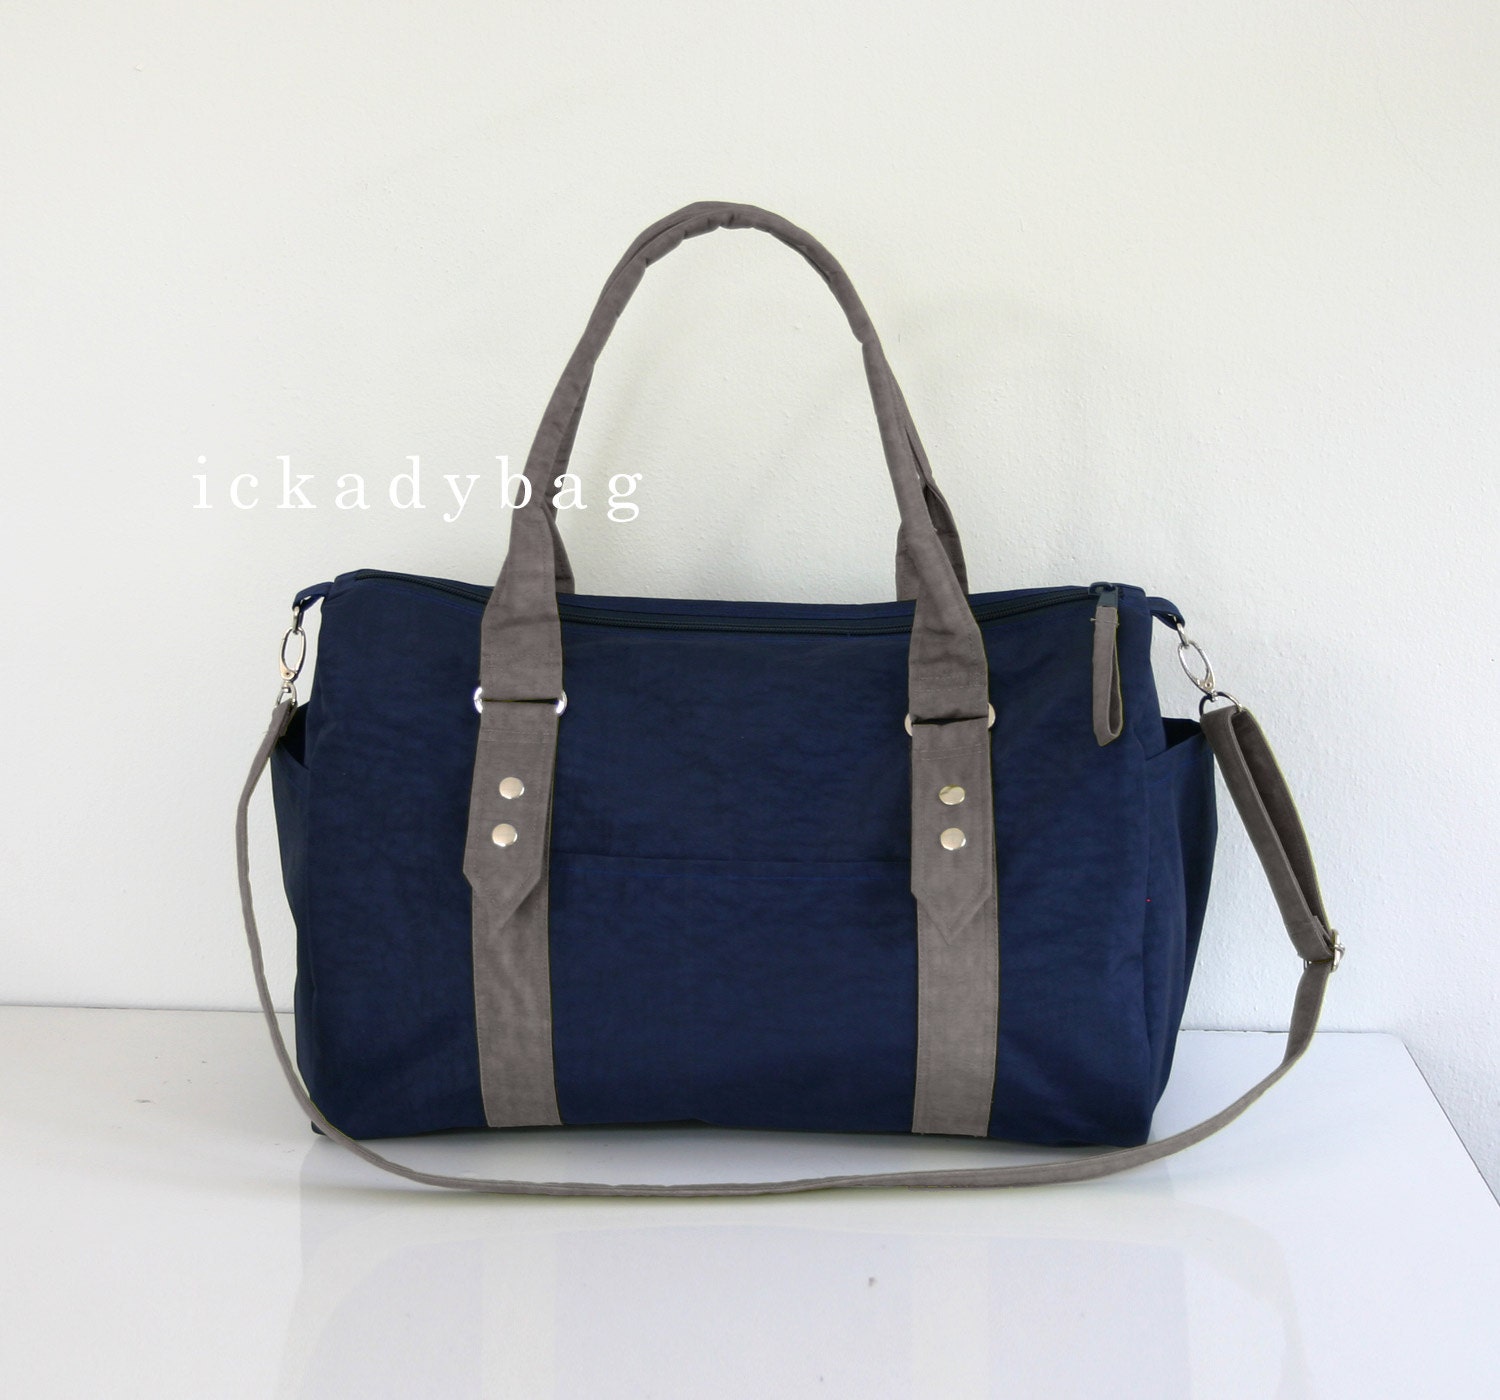 Clearance SALE Navy blue Messenger Bag with Gray Trim